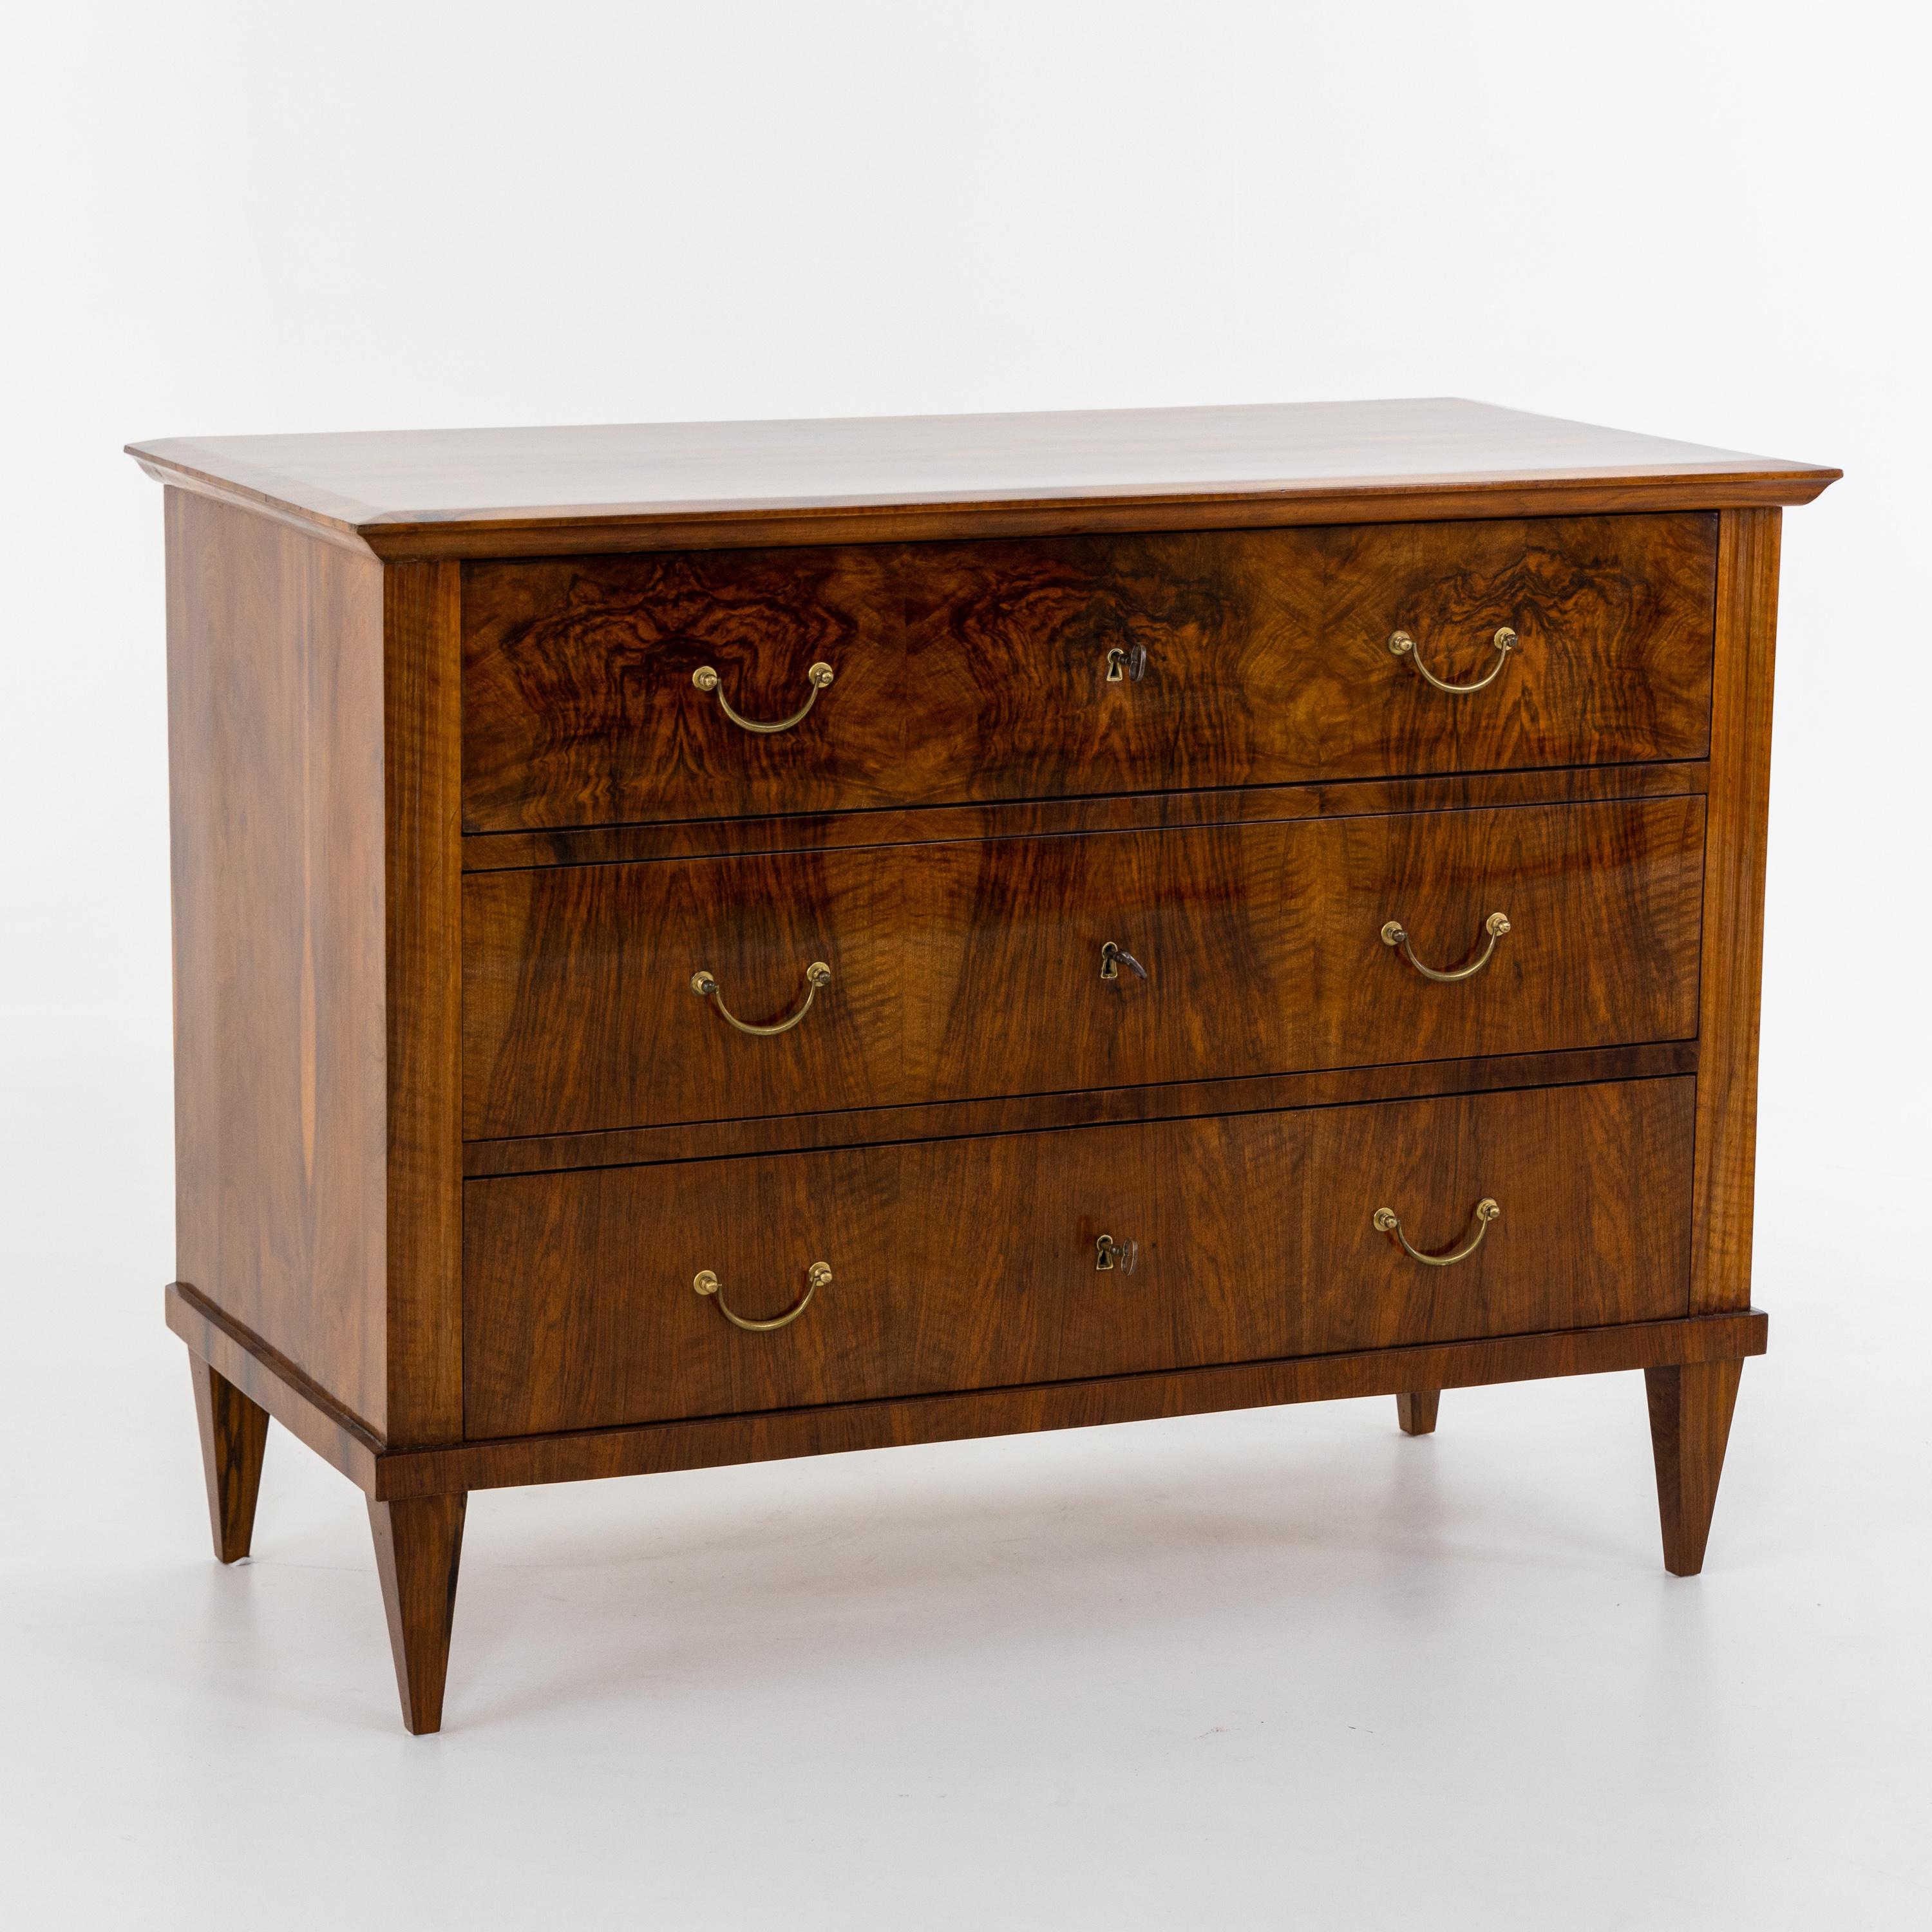 Biedermeier chest of drawers with three drawers on square tapered legs in walnut veneer. The commode was professionally restored and hand polished.